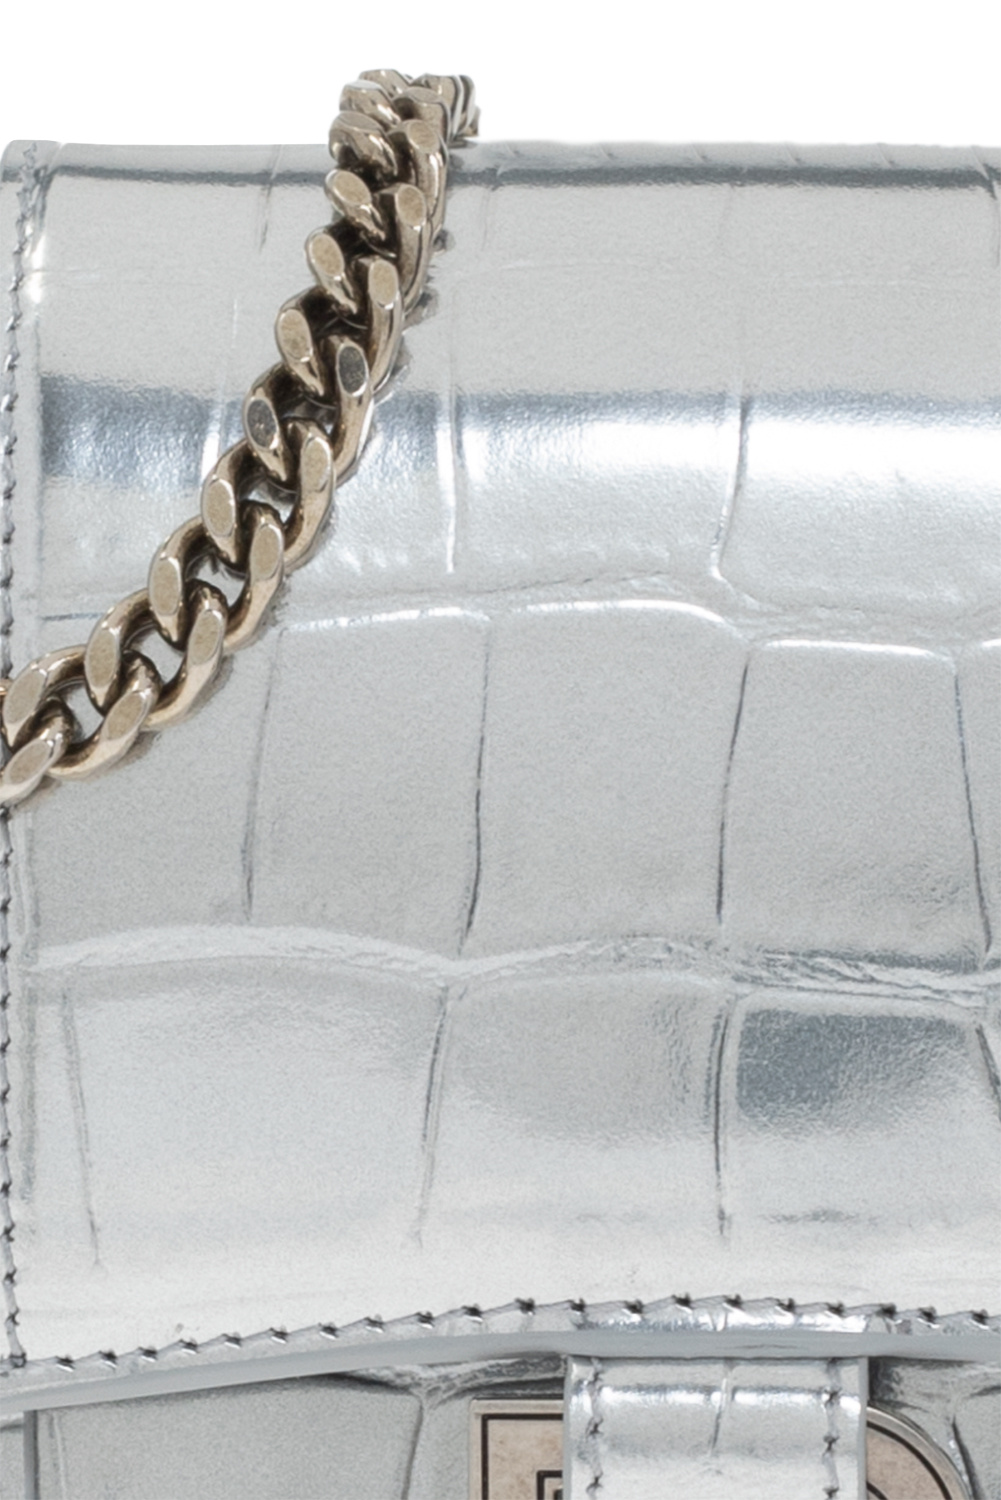 Balenciaga Hourglass Wallet On Chain Bag in Silver